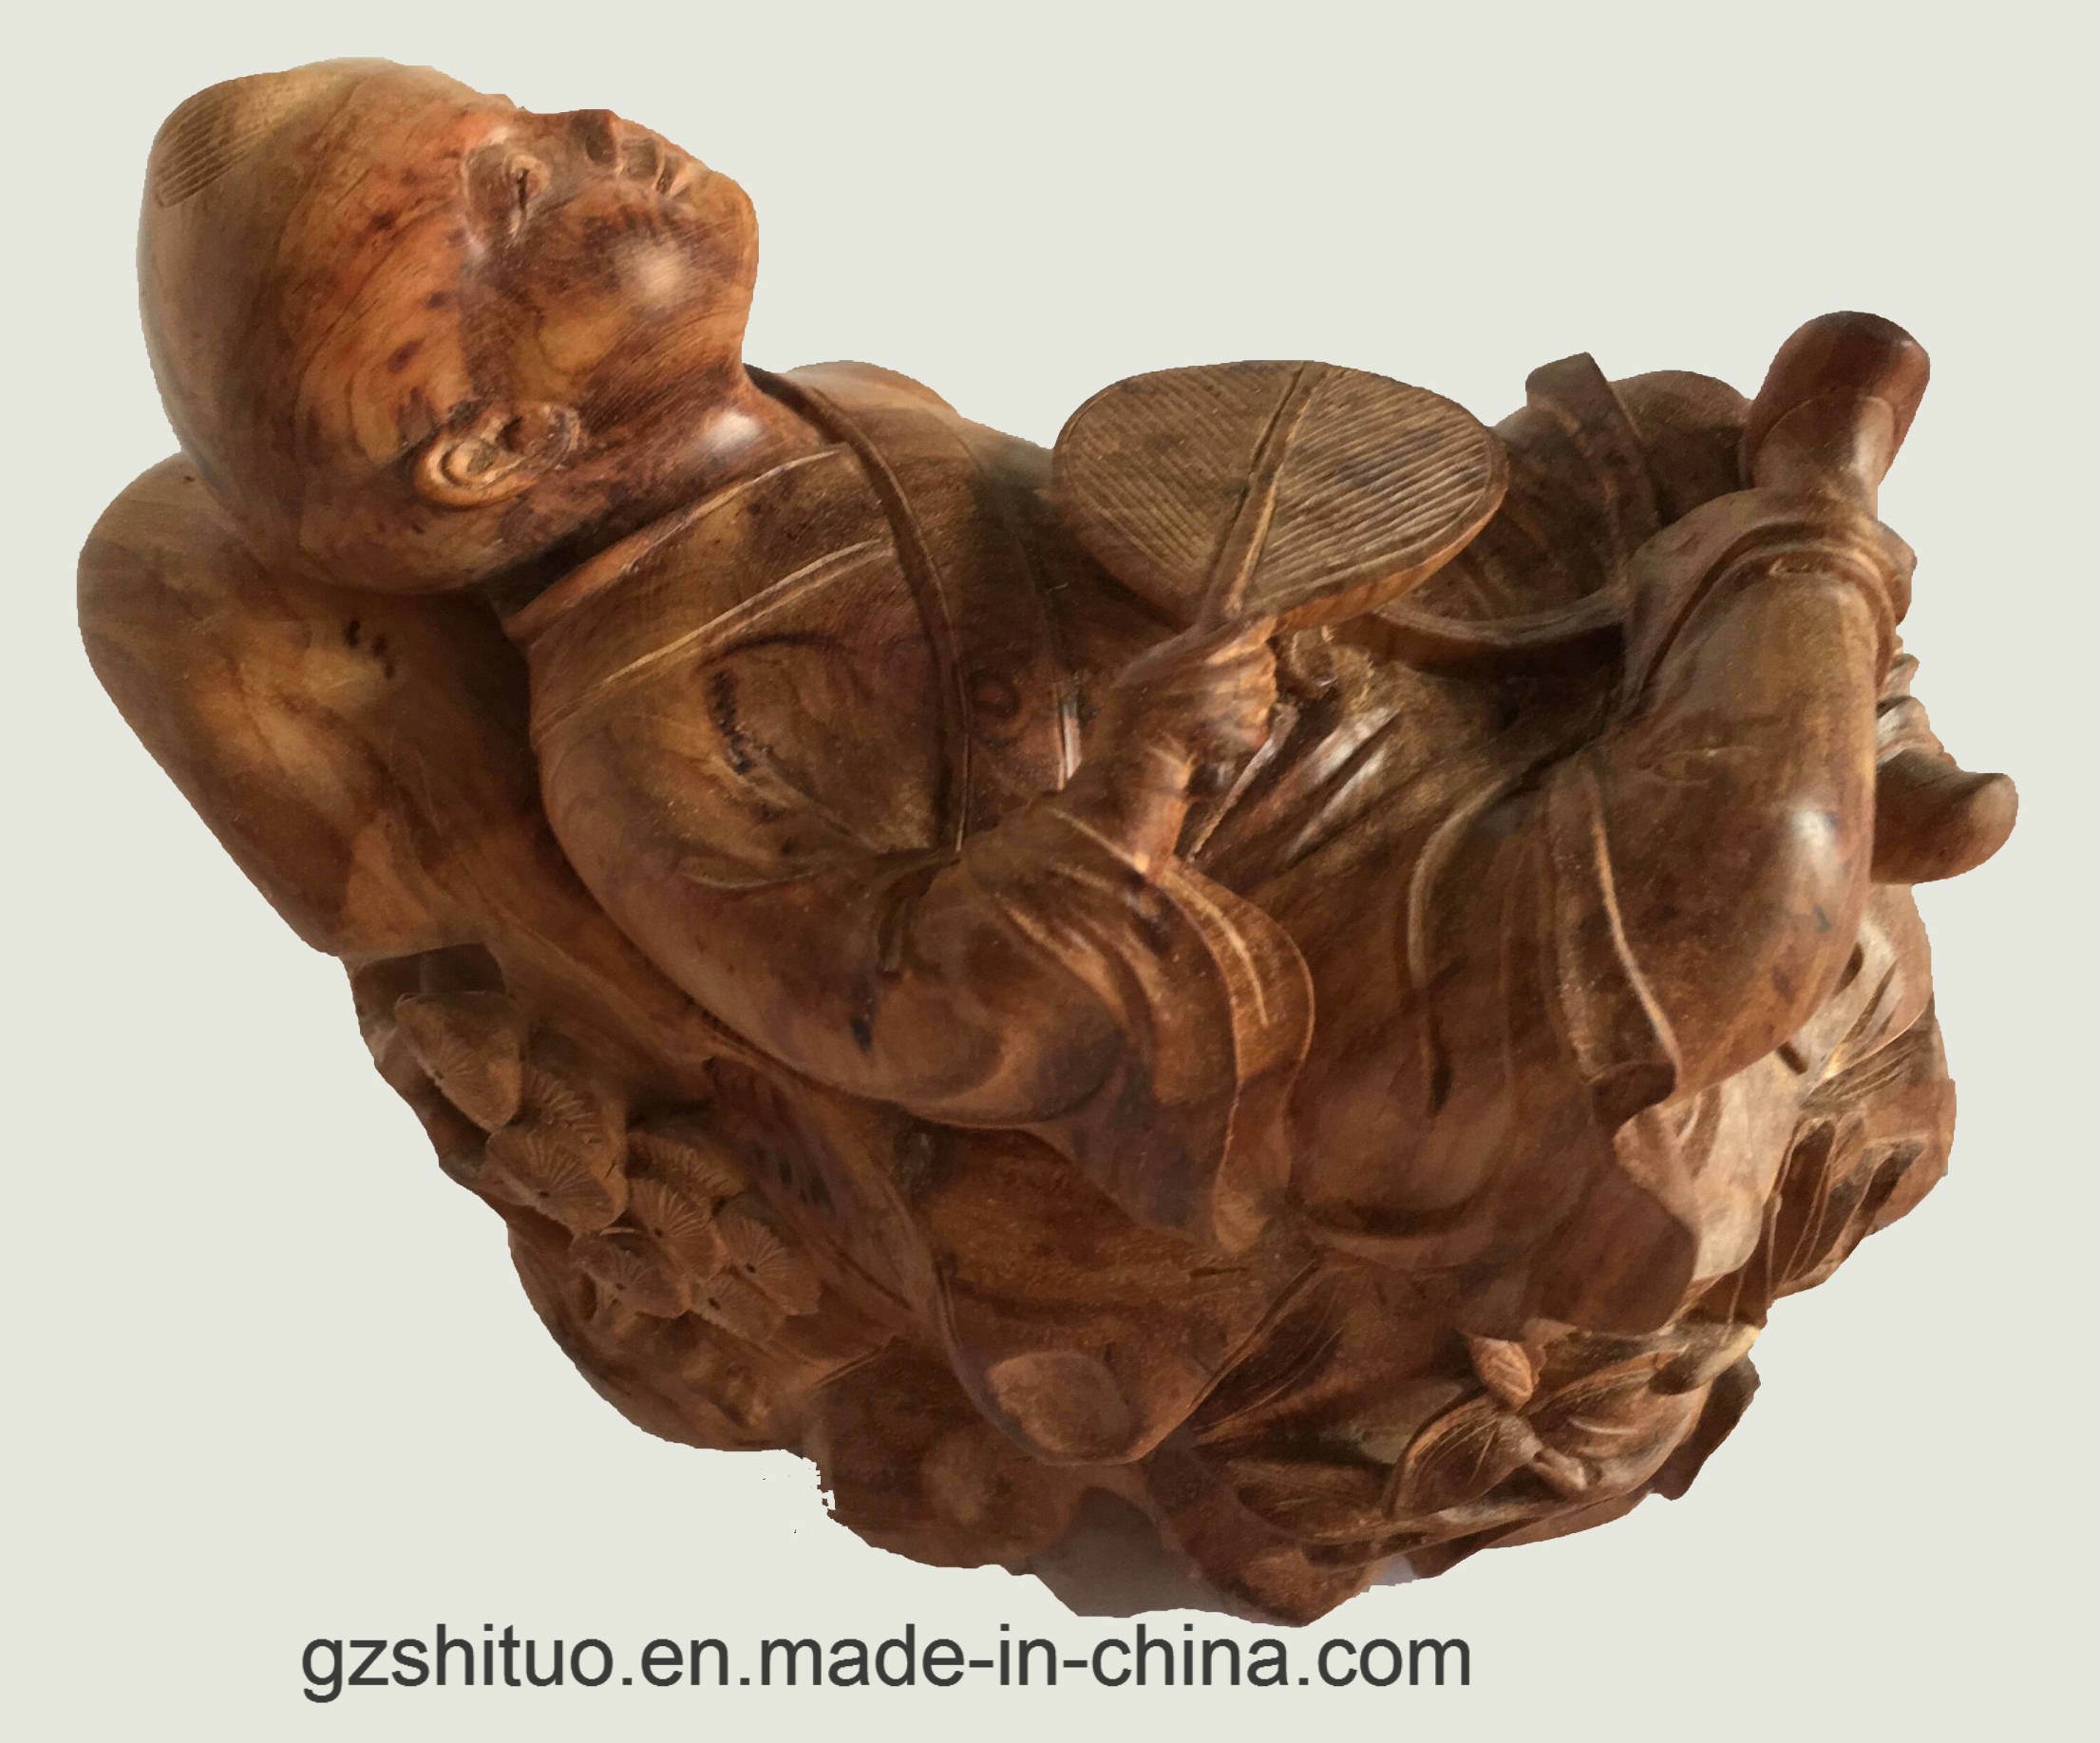 The Company Is Specialized in Processing Various Materials of Sculpture, Which Can Be Customized or Garden Landscape Sculpture